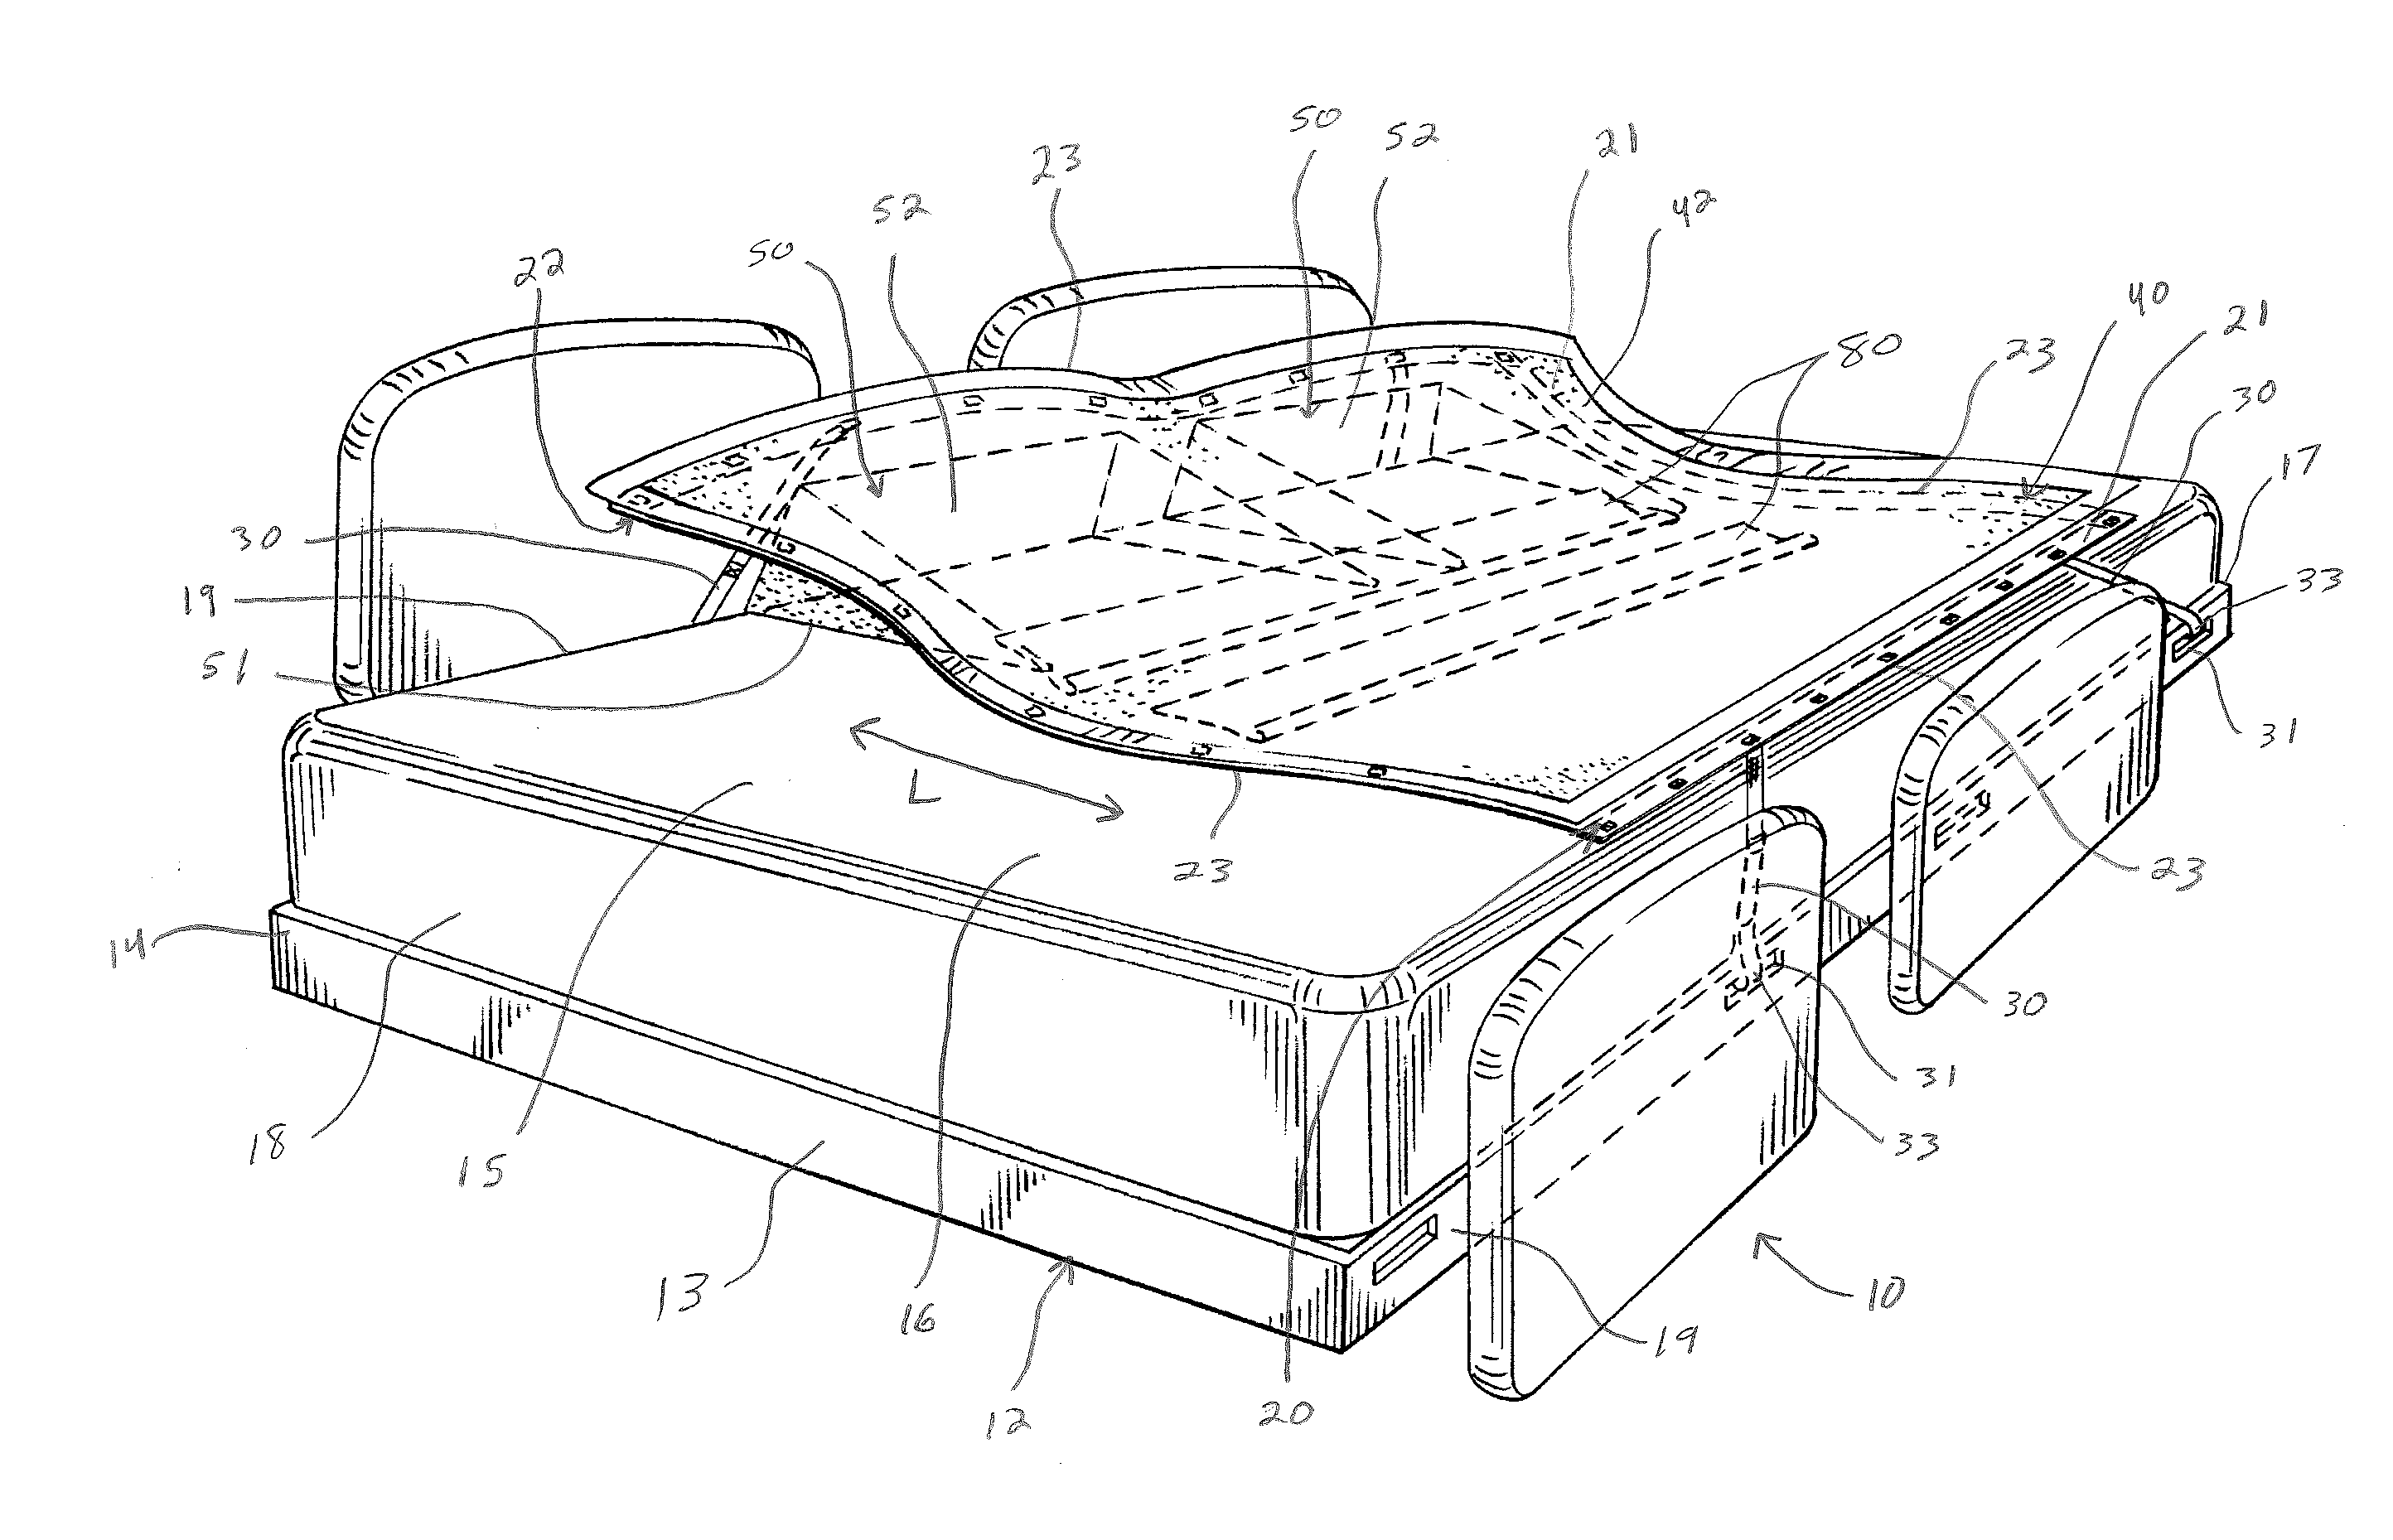 Apparatus and system for turning and positioning a patient